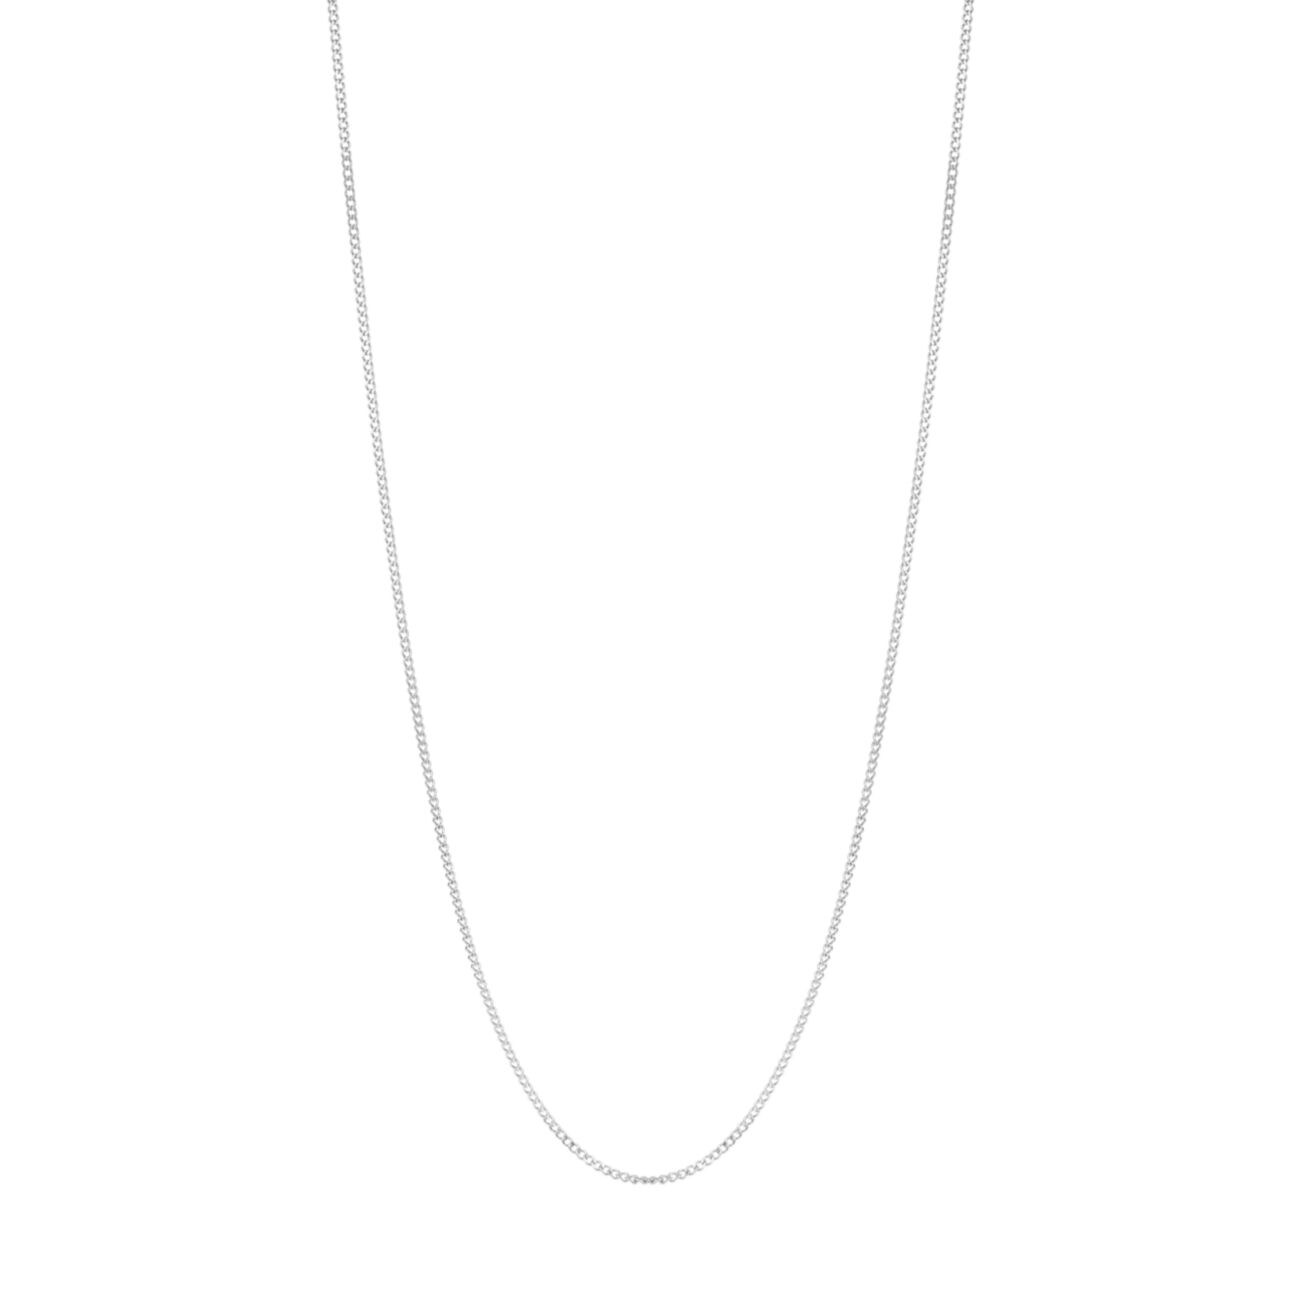 Rhodium-Plated Sterling Silver Chain Necklace Miansai